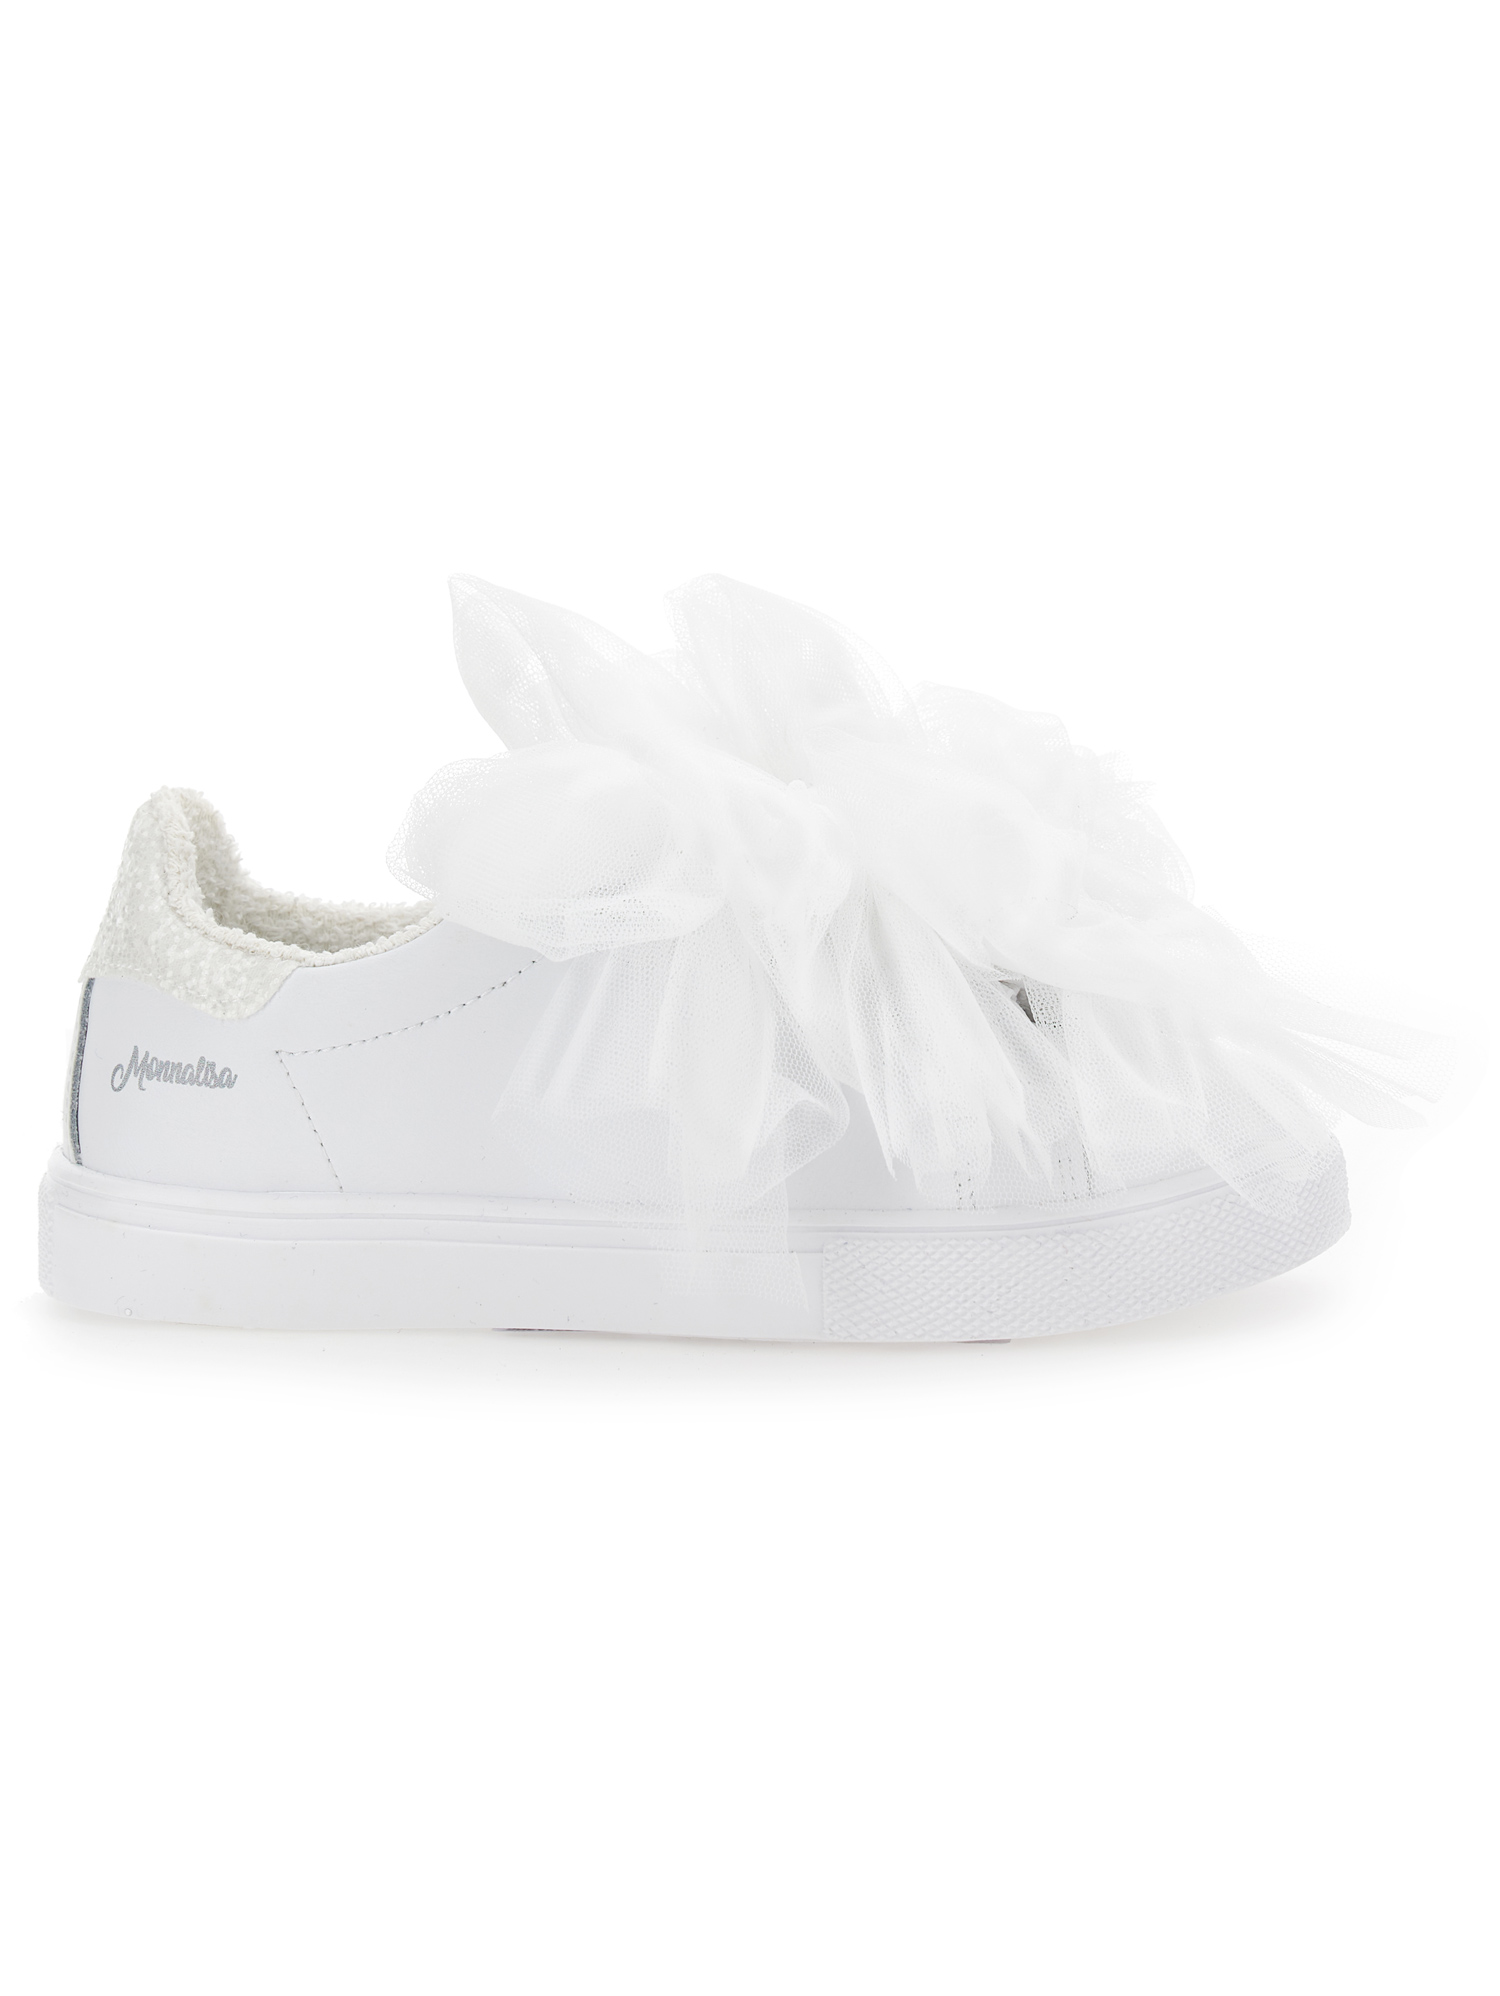 Monnalisa Bicast Trainers With Tulle Bows In Cream